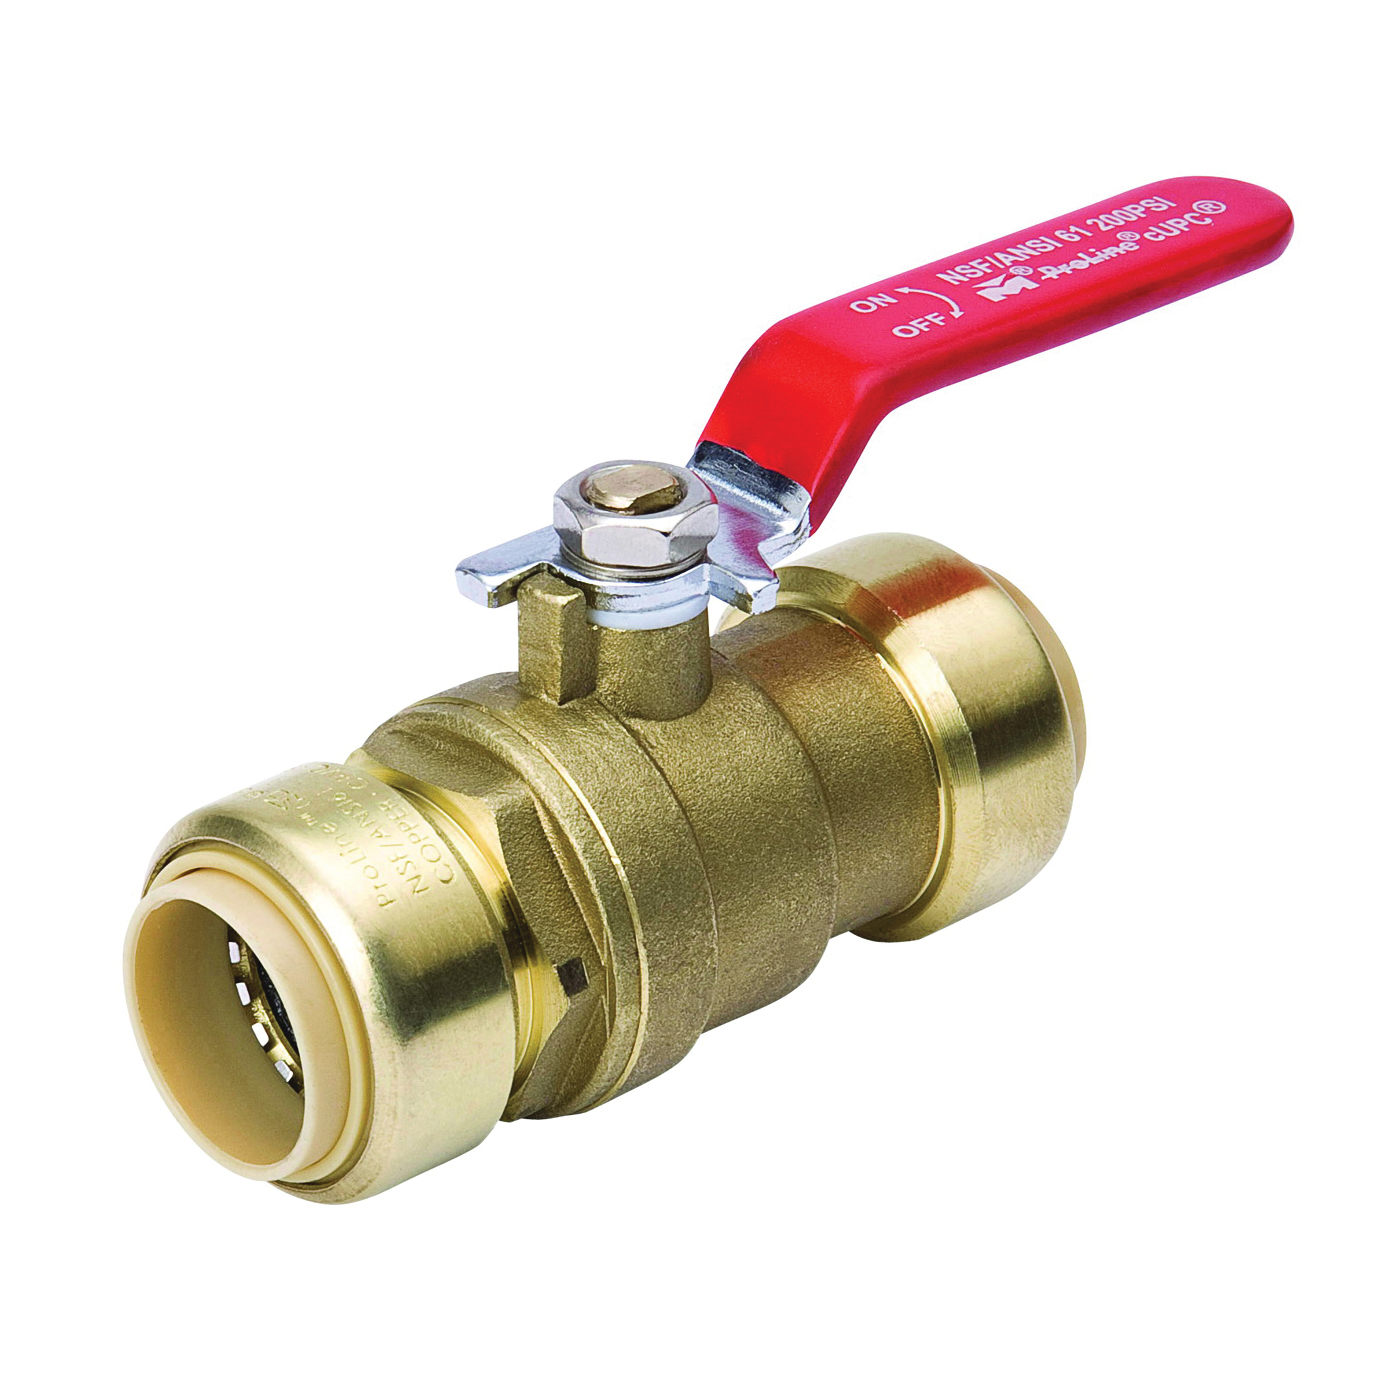 107-063HC Ball Valve, 1/2 in Connection, Push-Fit, 200 psi Pressure, Manual Actuator, Brass Body